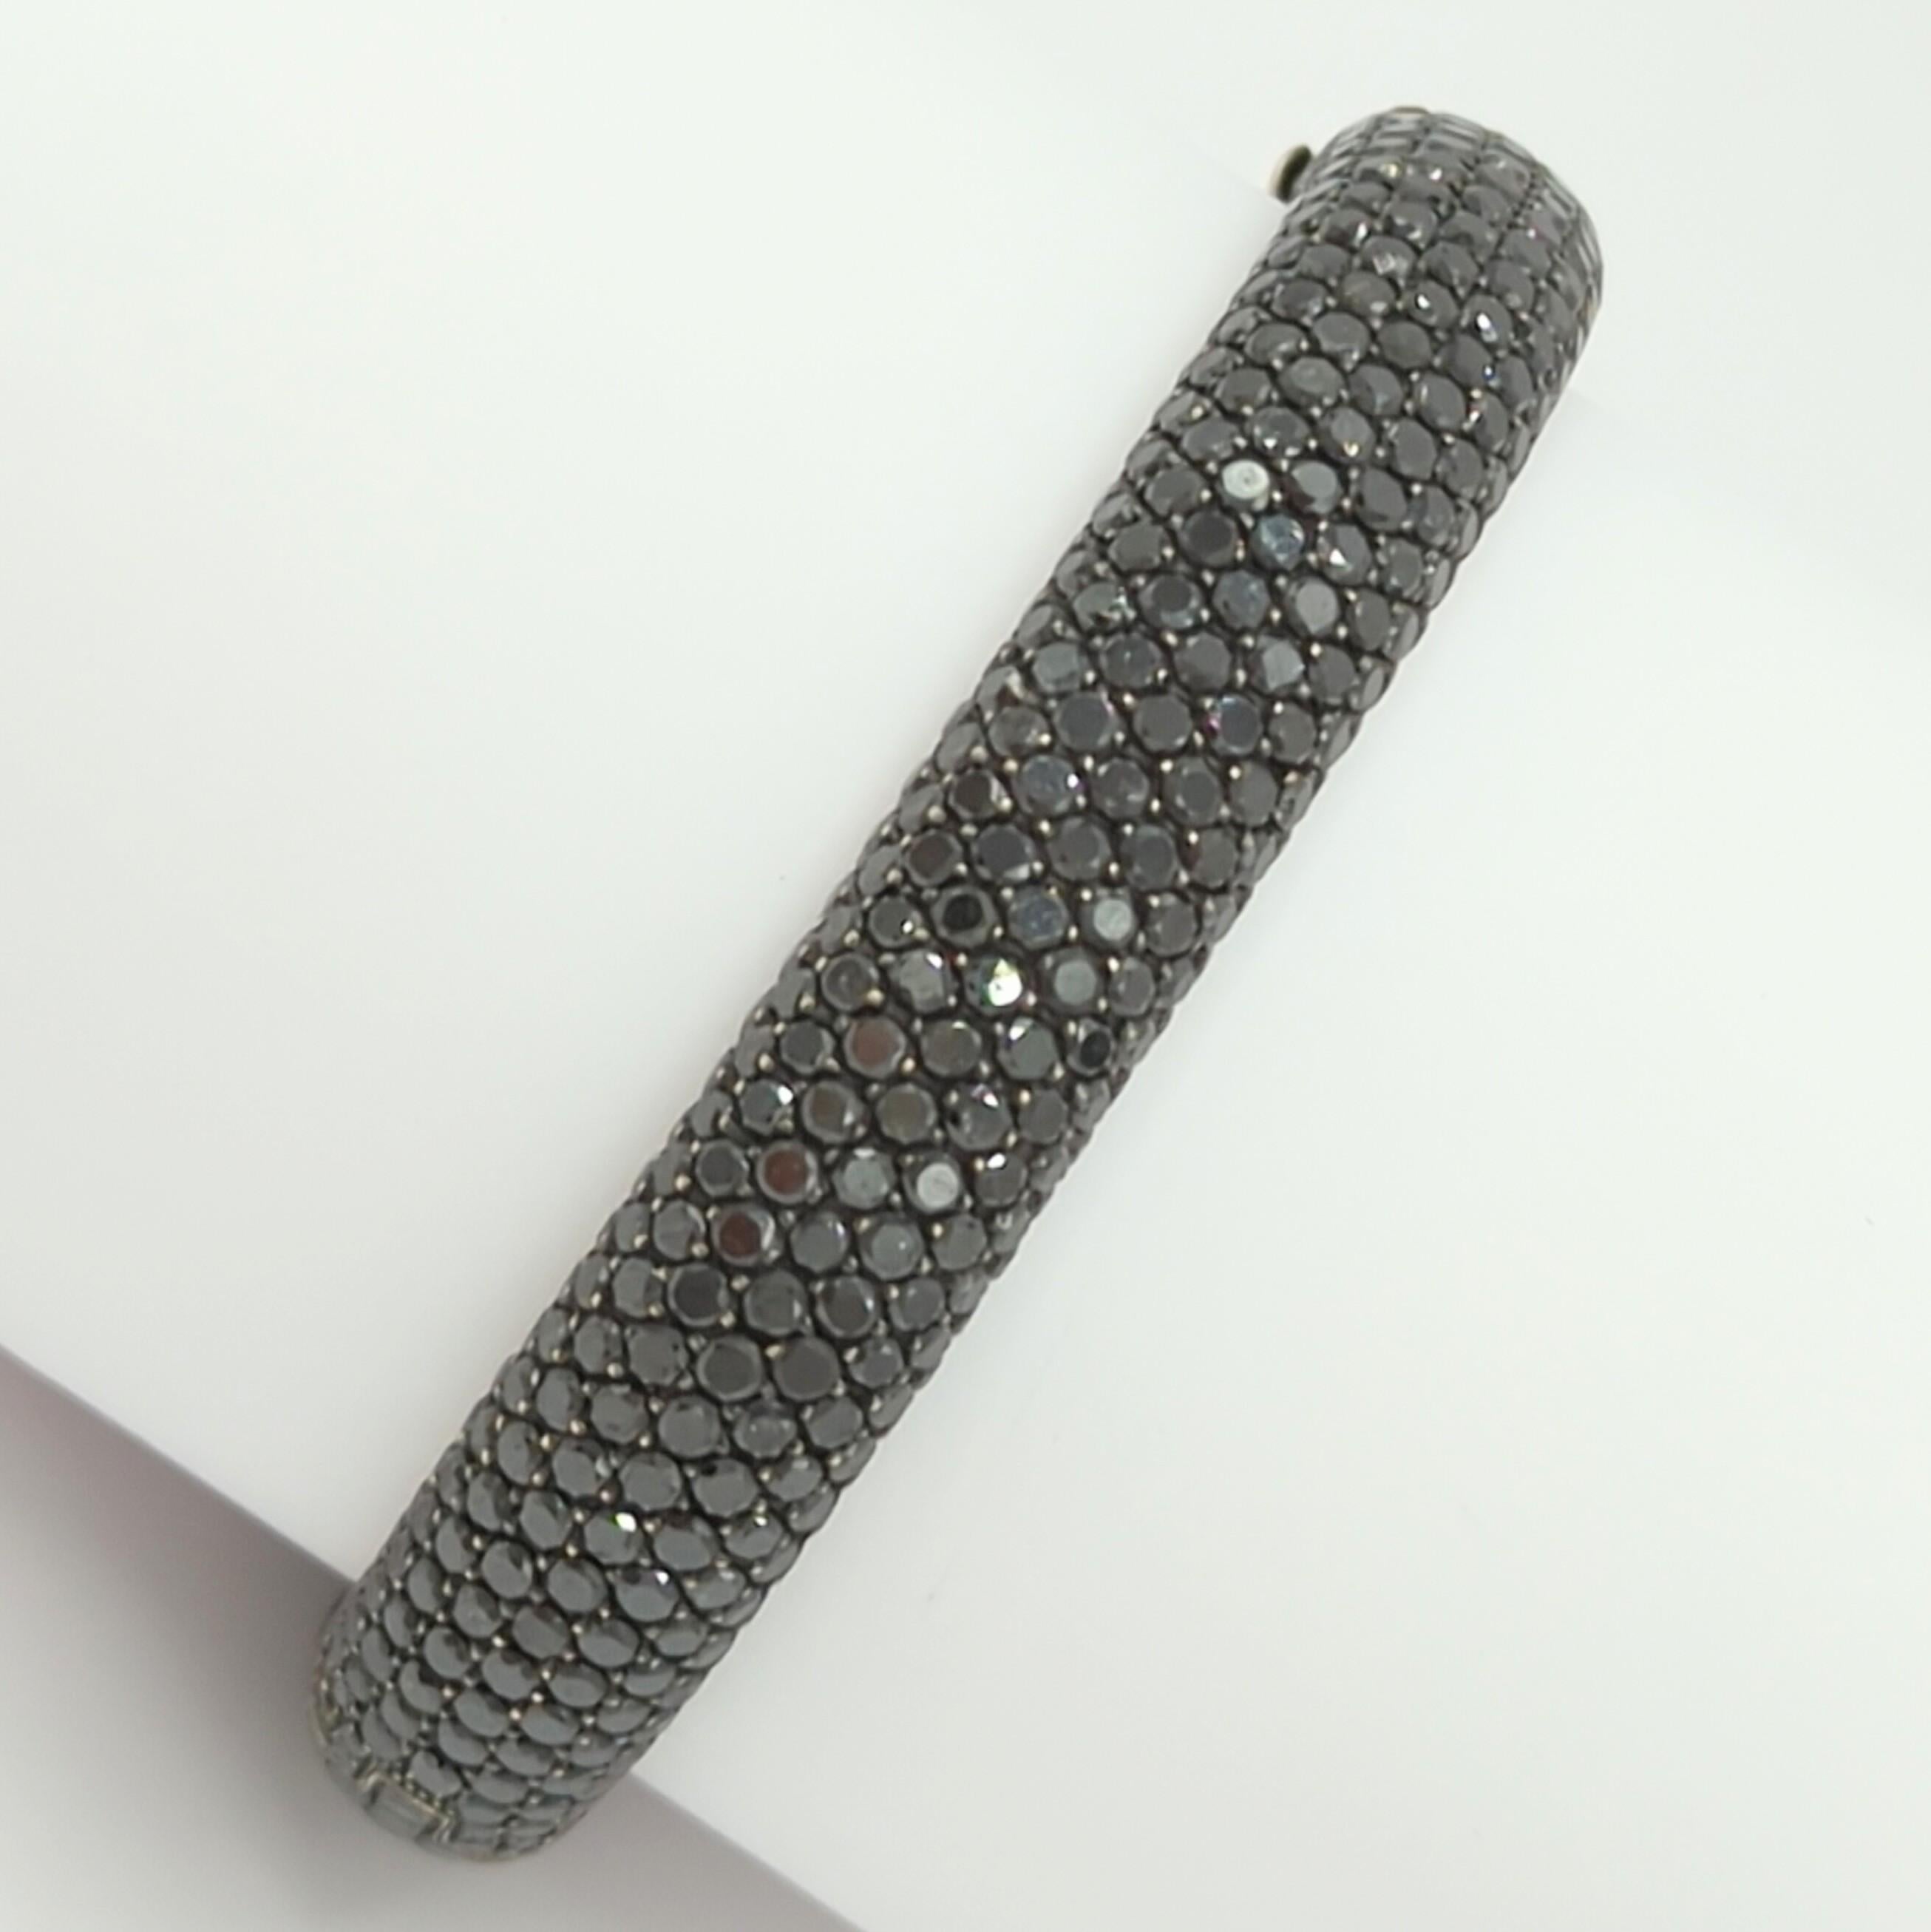 Gorgeous black diamond round bangle handmade in 18k white gold.  This bangle will go with any outfit and can be stacked with other bangles/bracelets or worn on it's own.  It is dramatic without being too flashy.